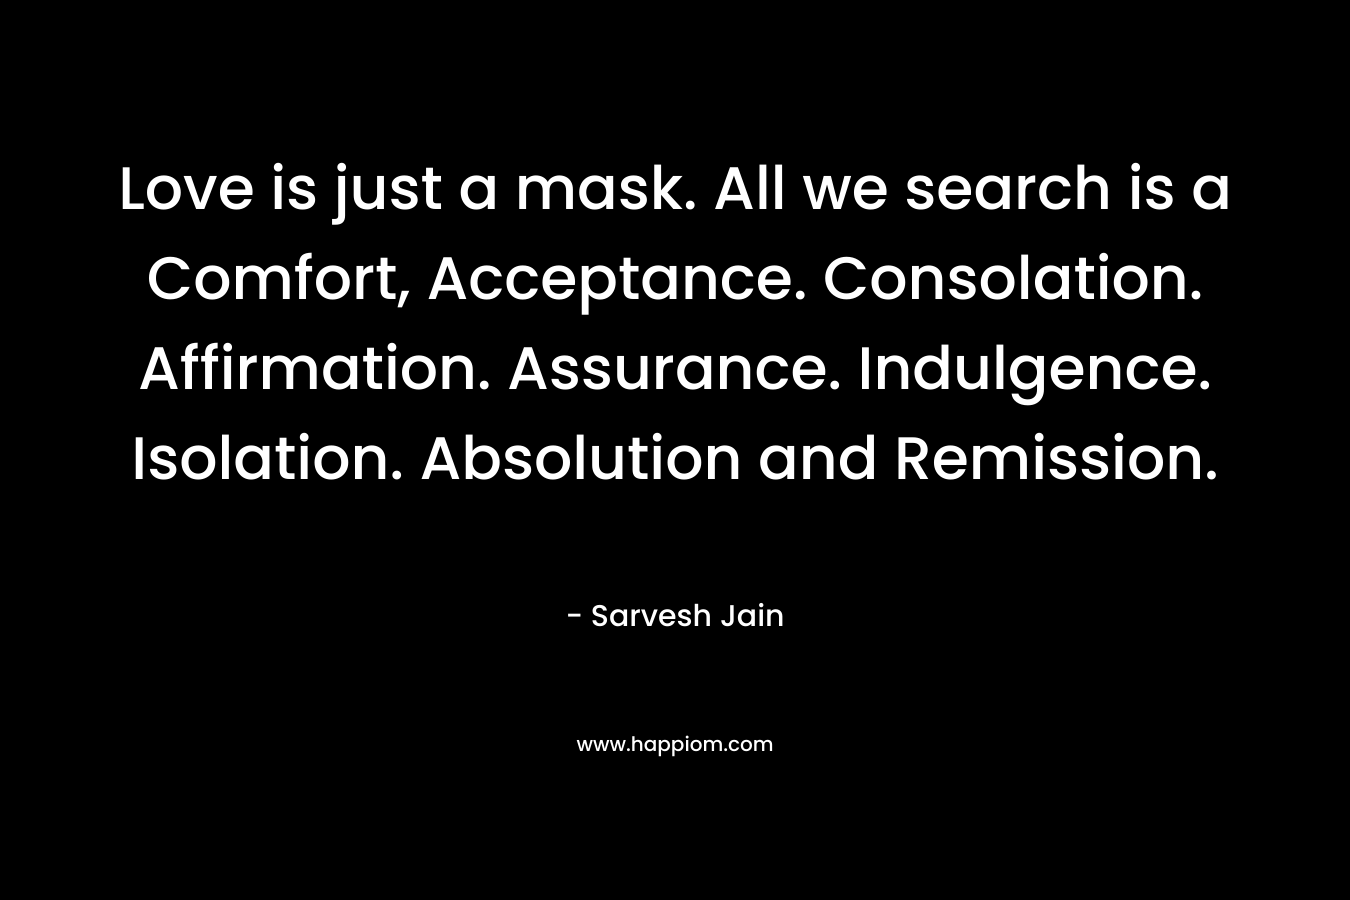 Love is just a mask. All we search is a Comfort, Acceptance. Consolation. Affirmation. Assurance. Indulgence. Isolation. Absolution and Remission. – Sarvesh Jain